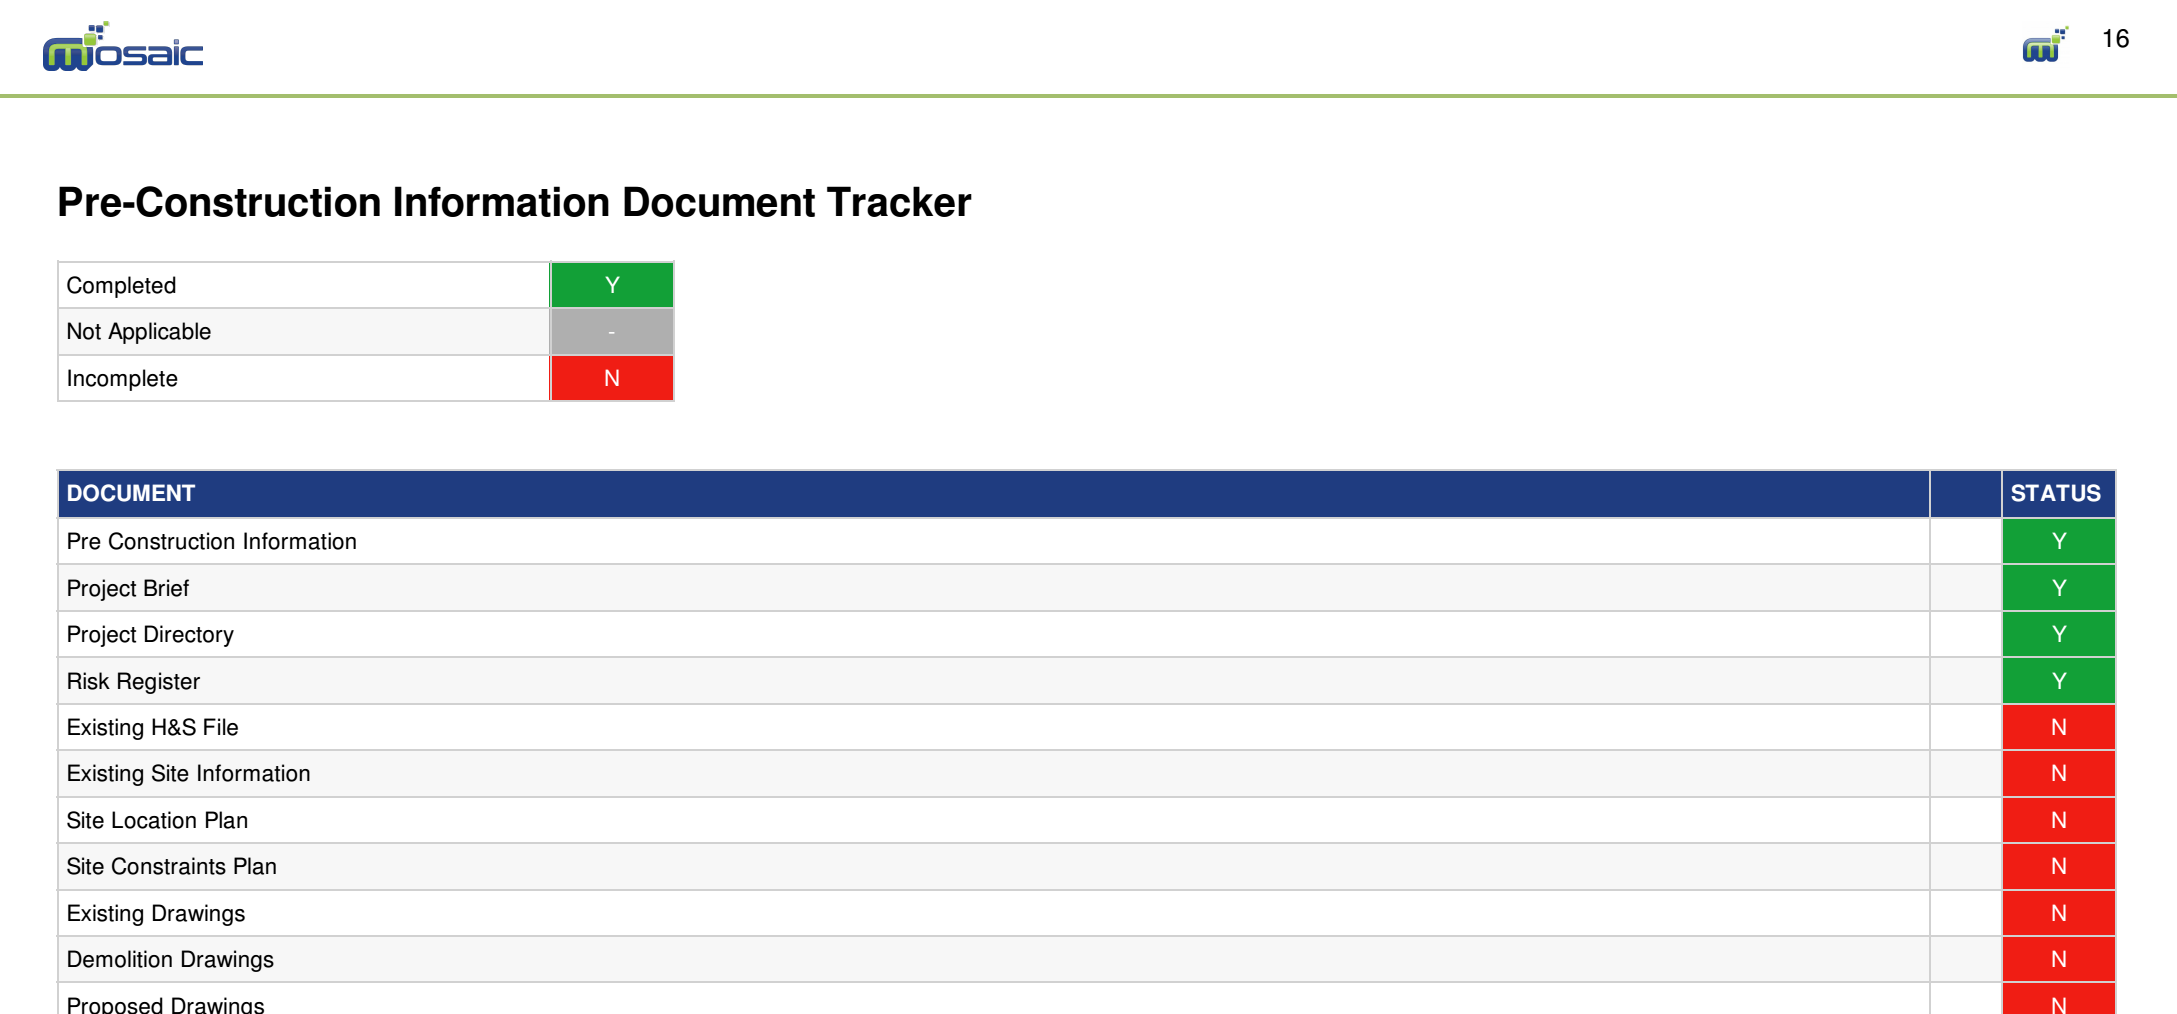  and a document tracker for PCI, H&S File, and contractor's O&Ms